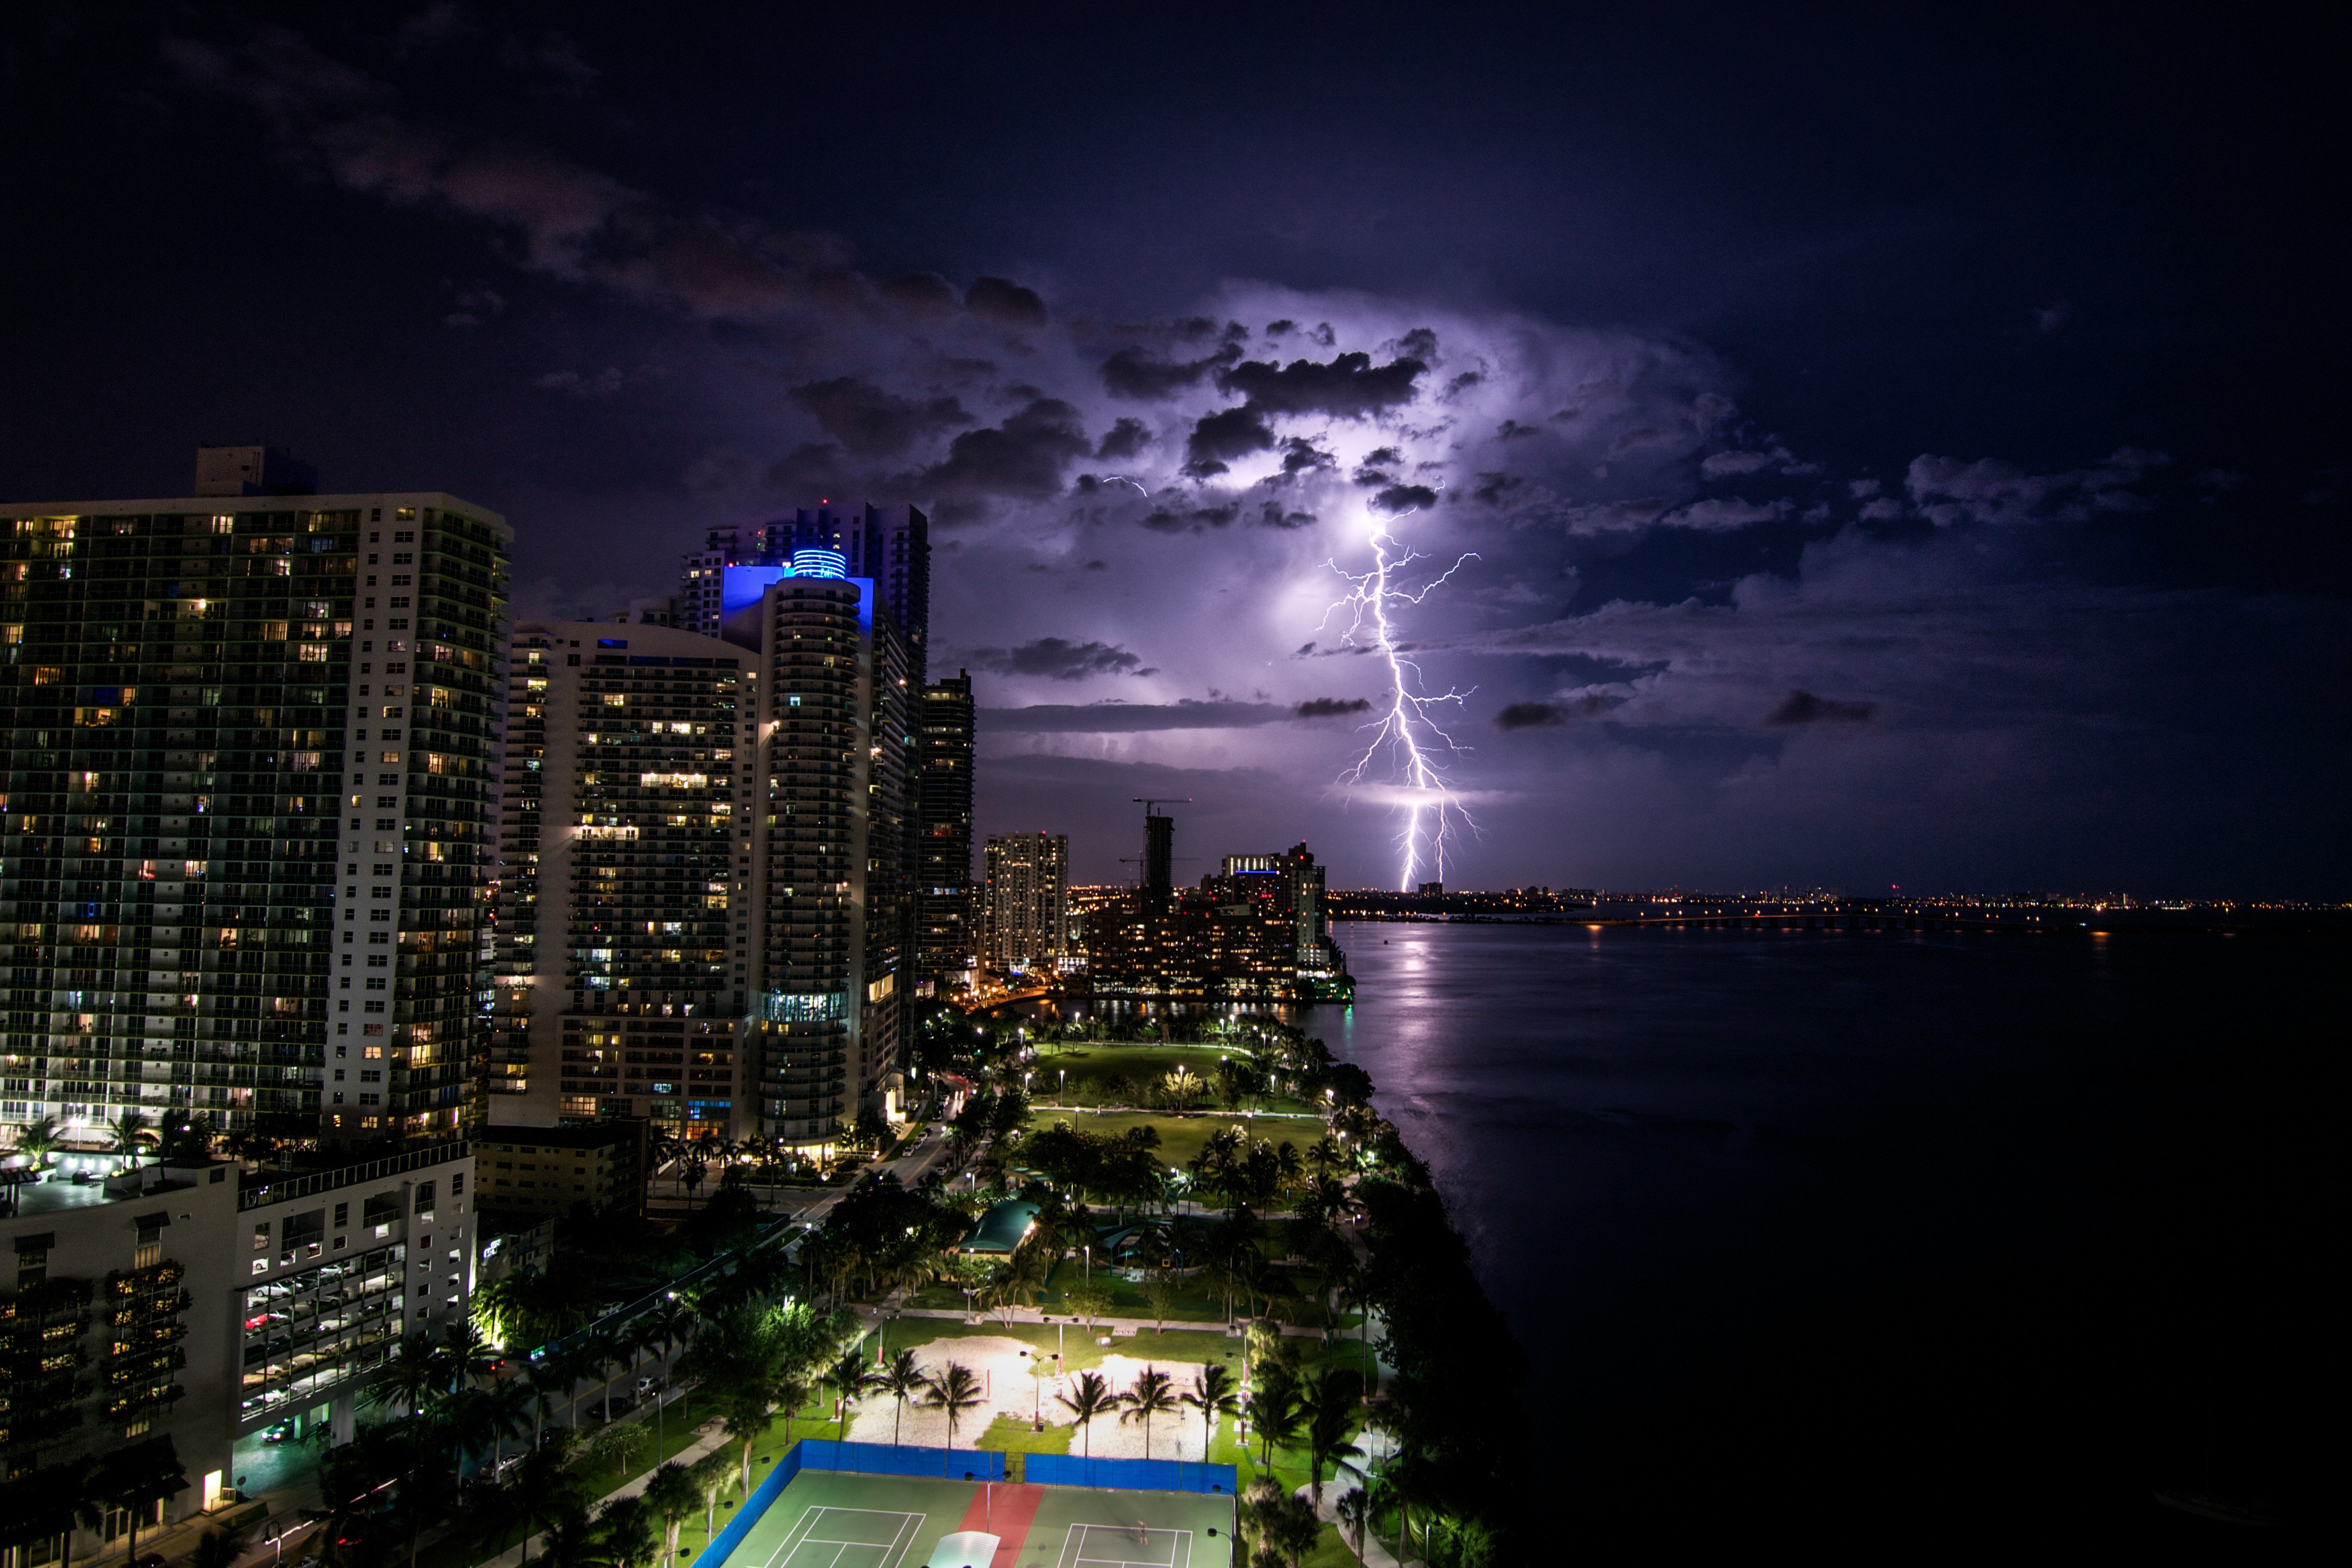 "I was really surprised I was able to capture a lightning strike like this," said Madeline Belt, who shot this photo off Biscayne Bay in Miami in June. The storm would later become Hurricane Arthur.